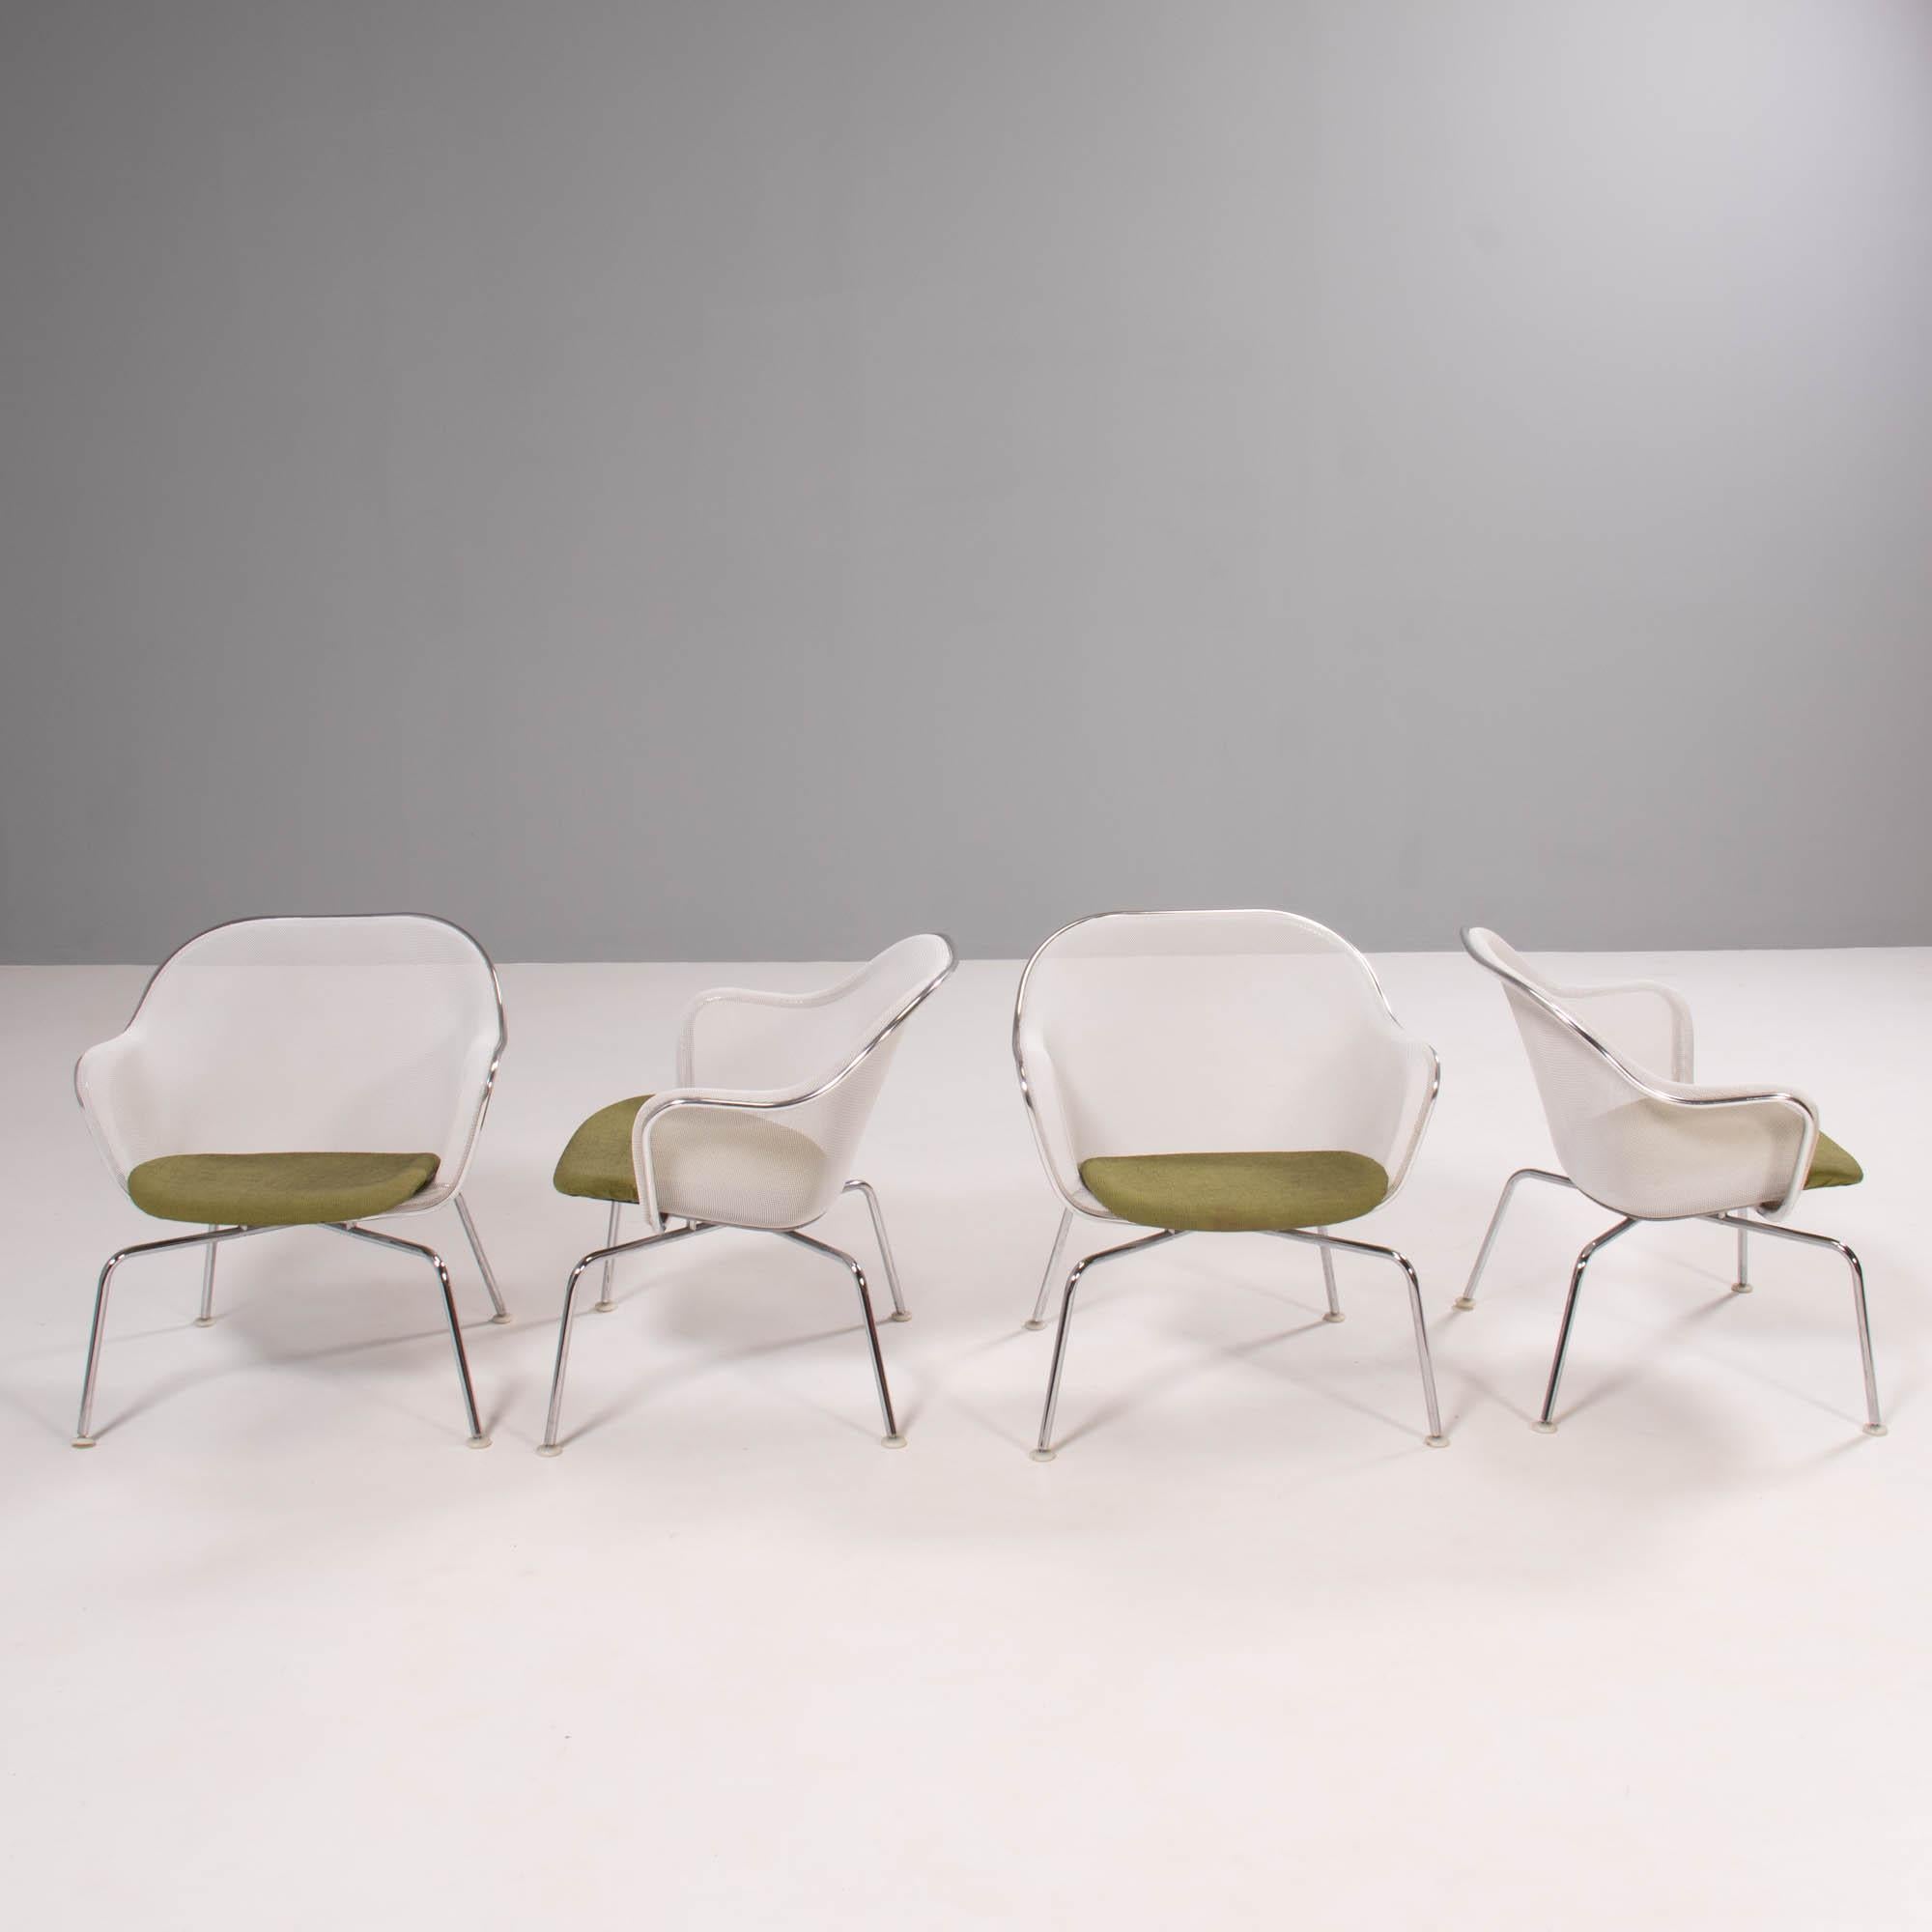 Designed by Antonio Citterio for B&B Italia in 2000, the Iuta chair has become an iconic design for the brand.

Constructed from a light steel mesh sprayed in white, the chairs feature a contrasting aluminium perimeter profile which creates